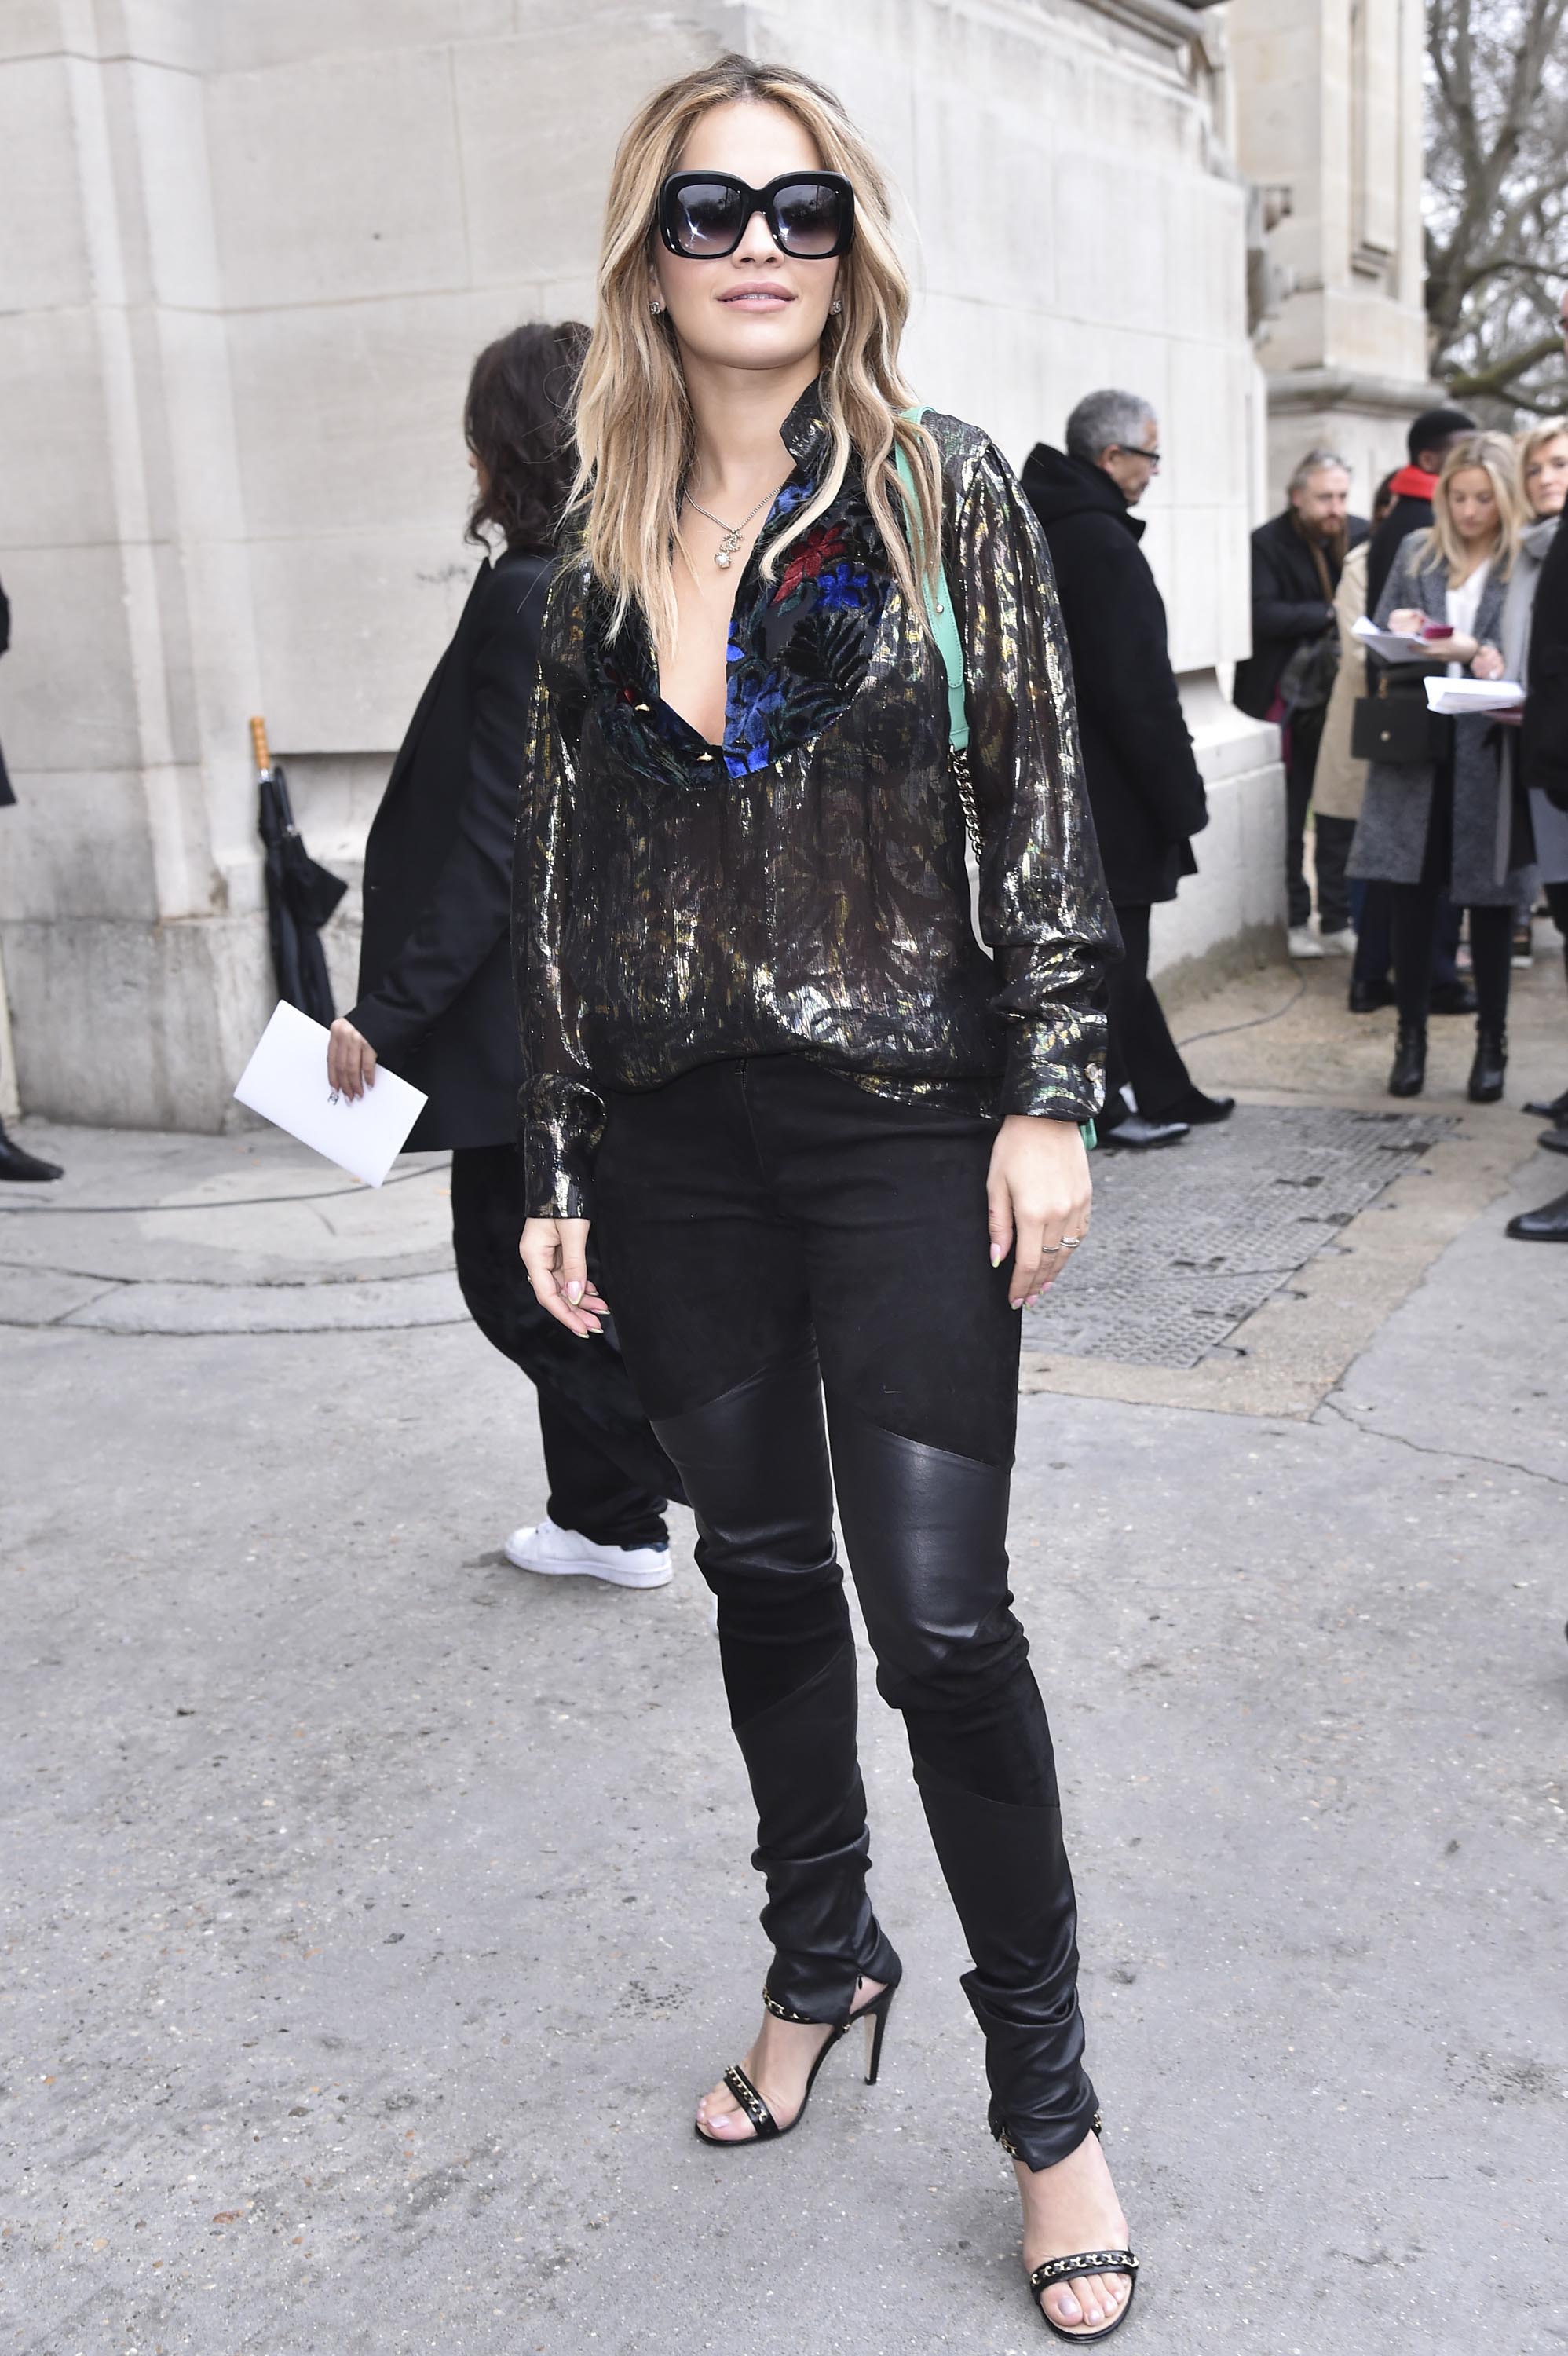 Rita Ora is seen arriving at Chanel fashion show